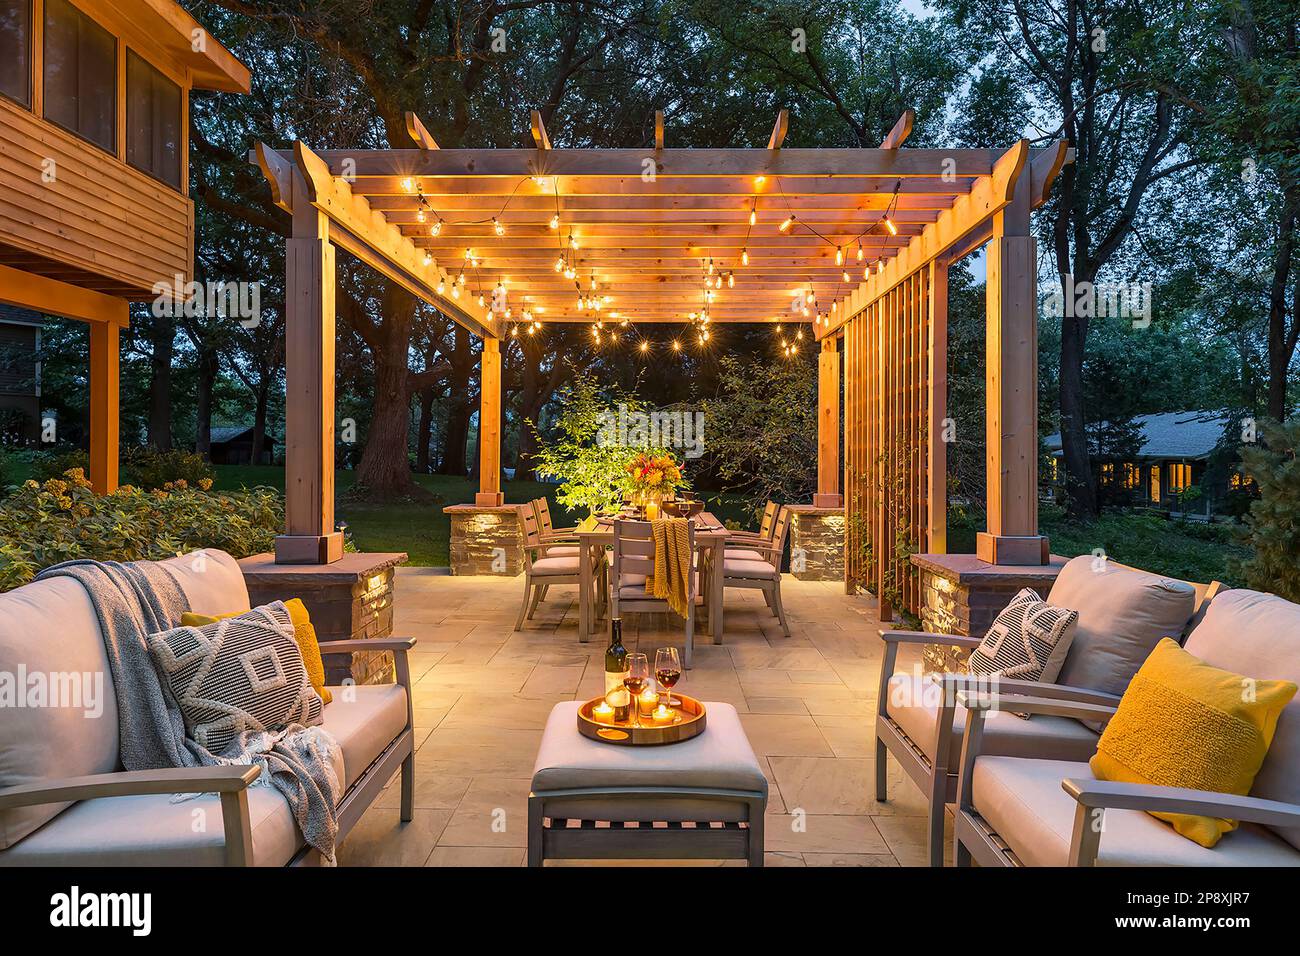 Pergola on patio is lit up with bright string lights on a summer evening  Stock Photo - Alamy